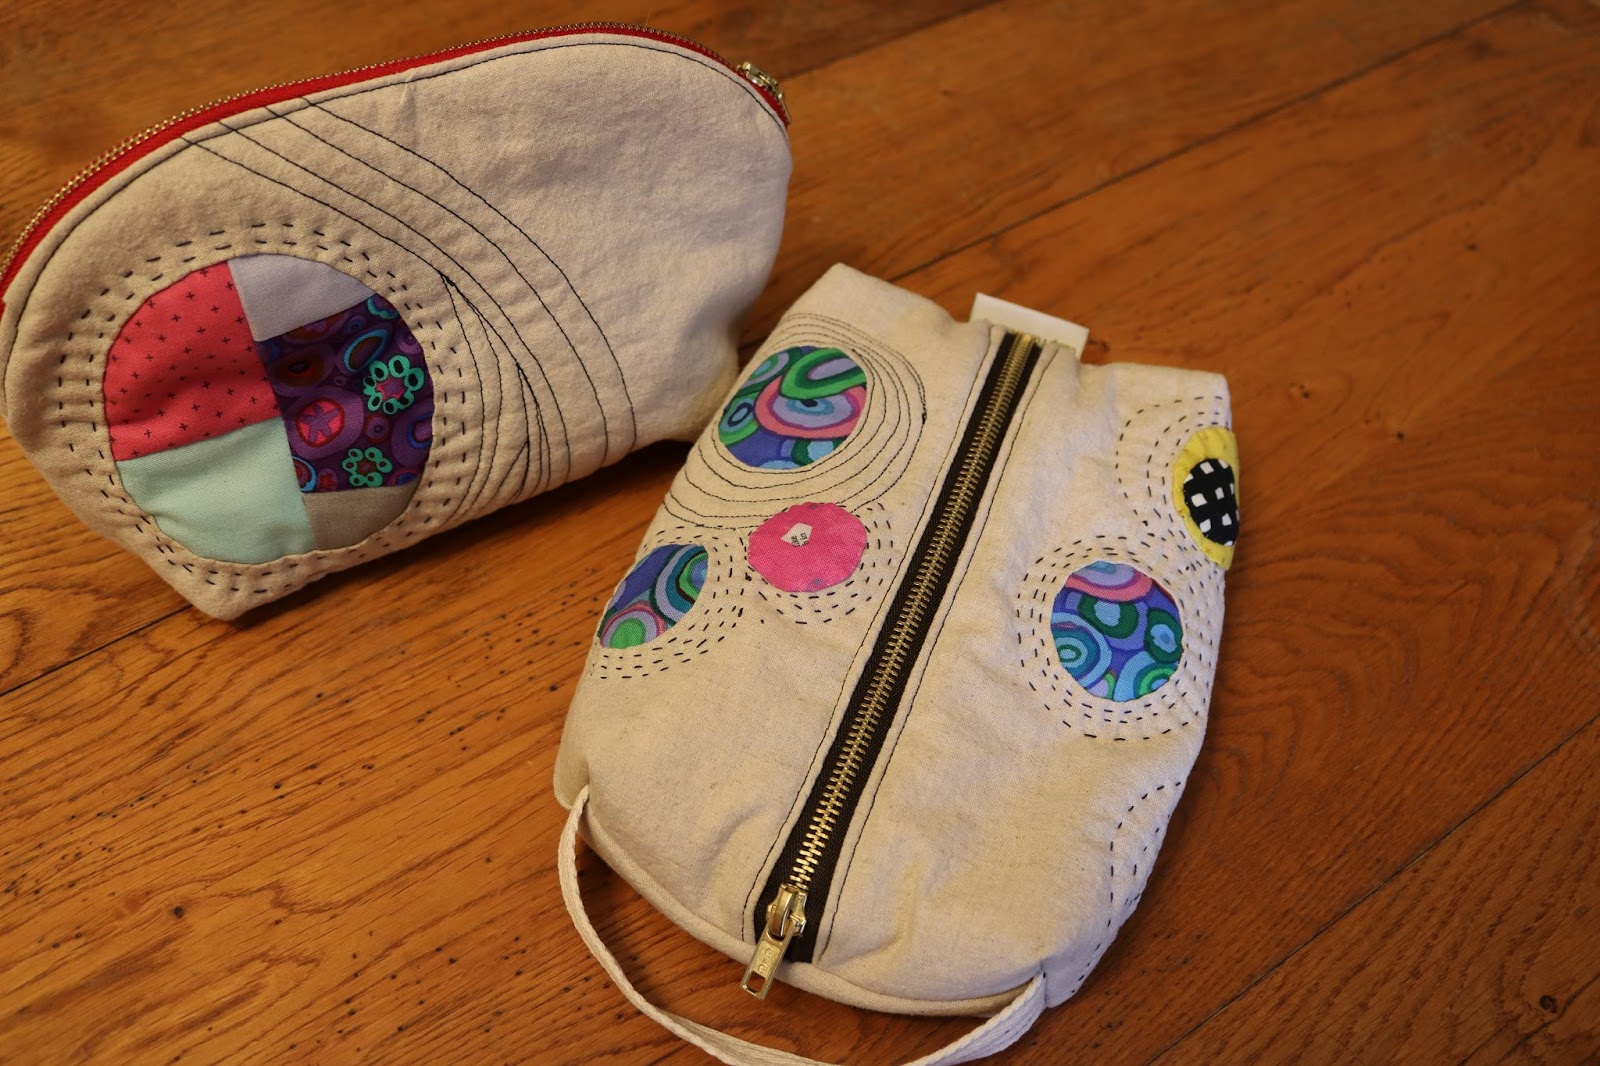 TIA CURTIS QUILTS: Quilted Boxy Zipper Bag Tutorial